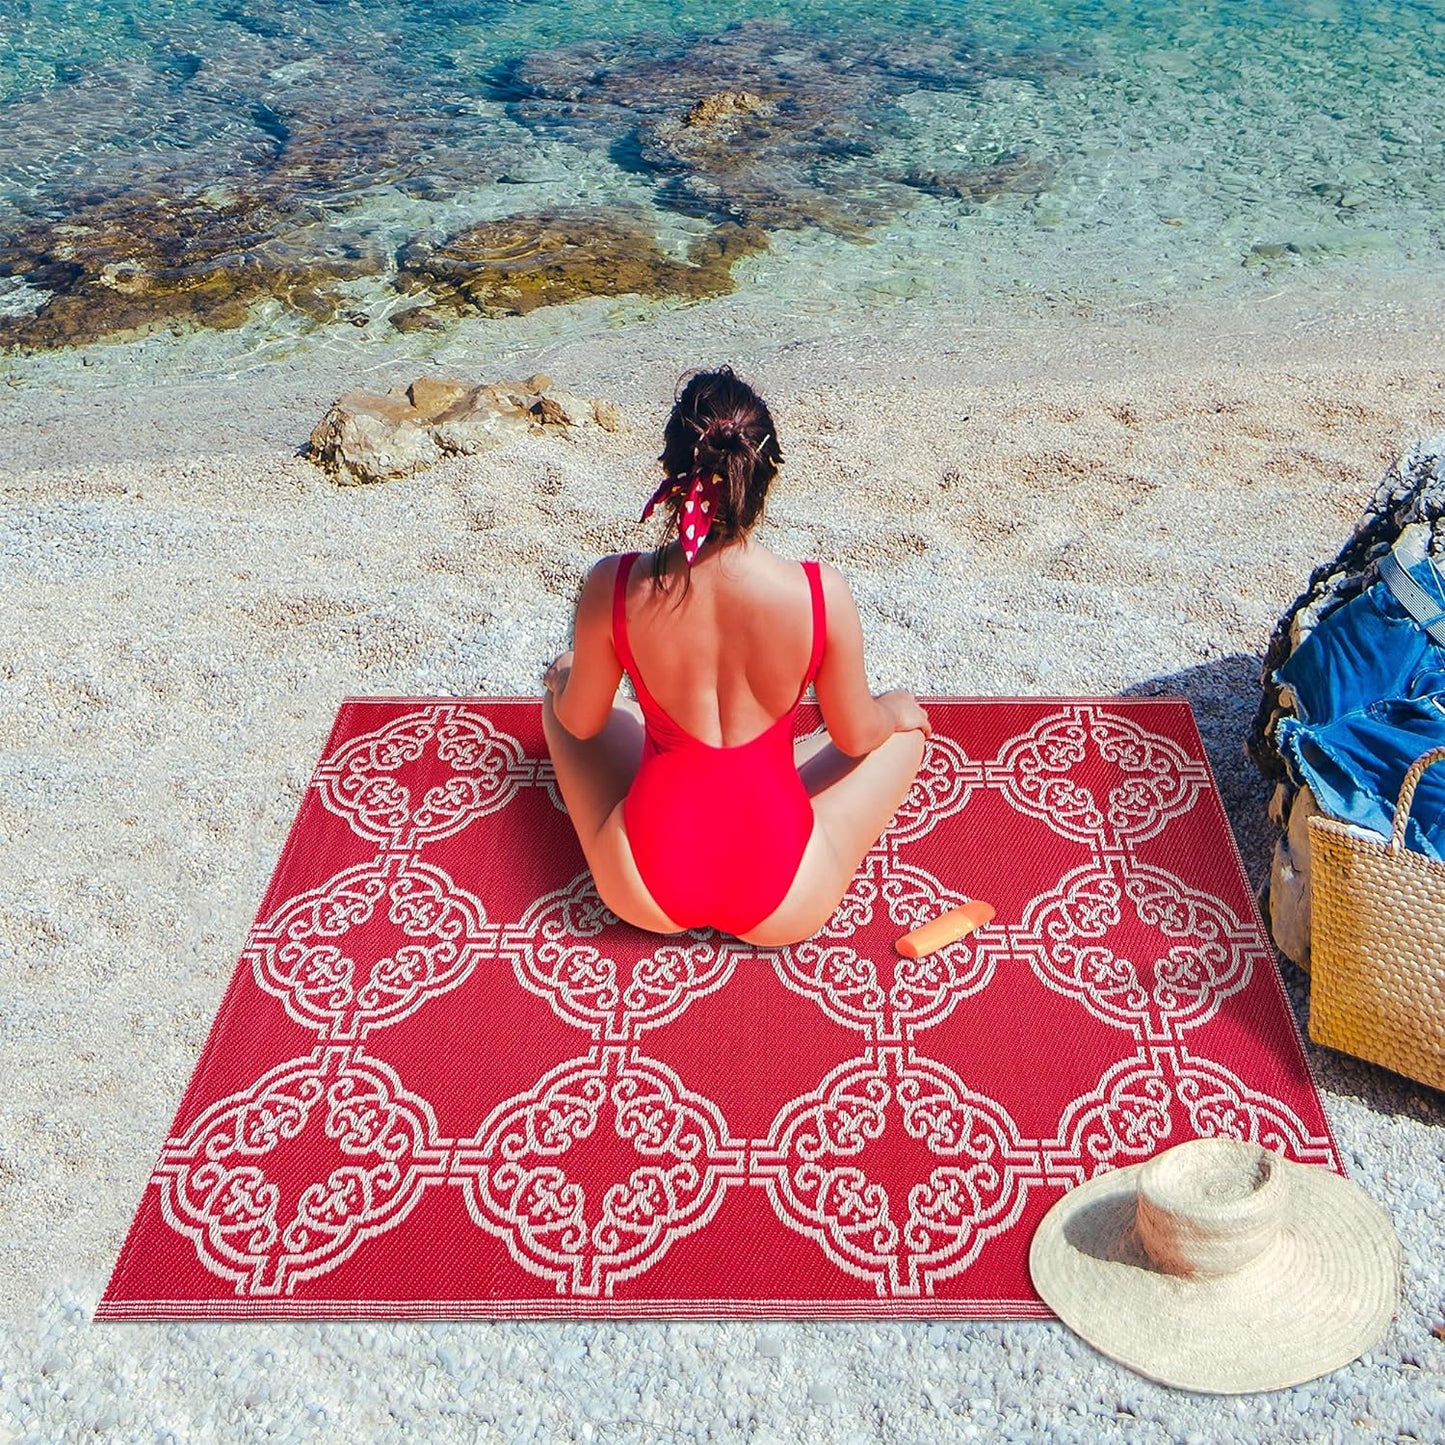 Playa Outdoor Rug - Crease-Free Recycled Plastic Floor Mat for Patio, Camping, Beach, Balcony, Porch, Deck - Weather, Water, Stain, Lightweight, Fade and UV Resistant - Marrakesh- Red & White